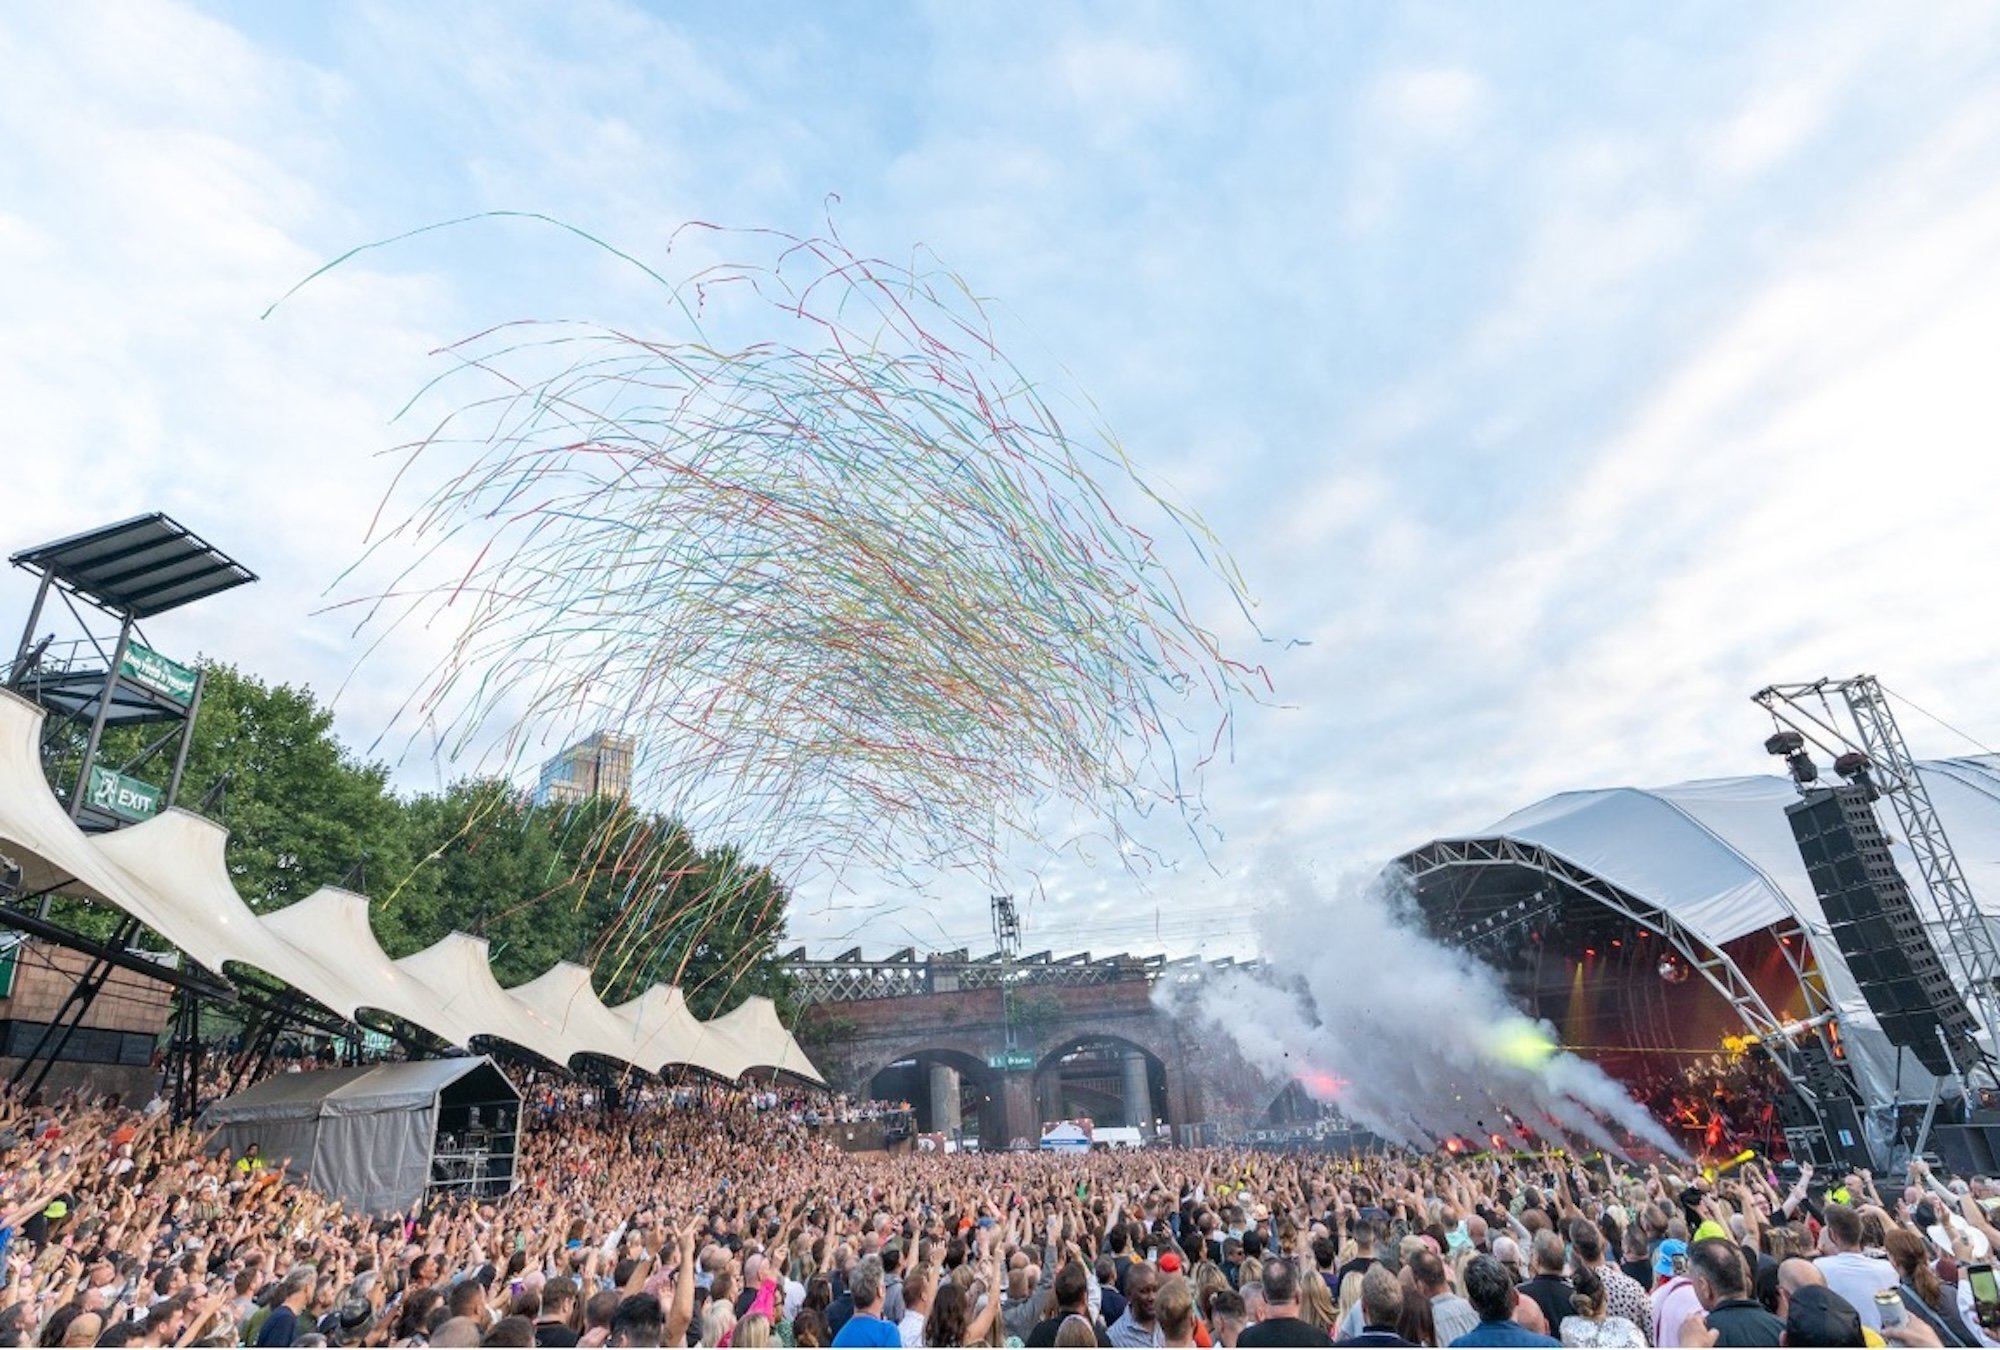 Sounds of the City will take place at Castlefield Bowl